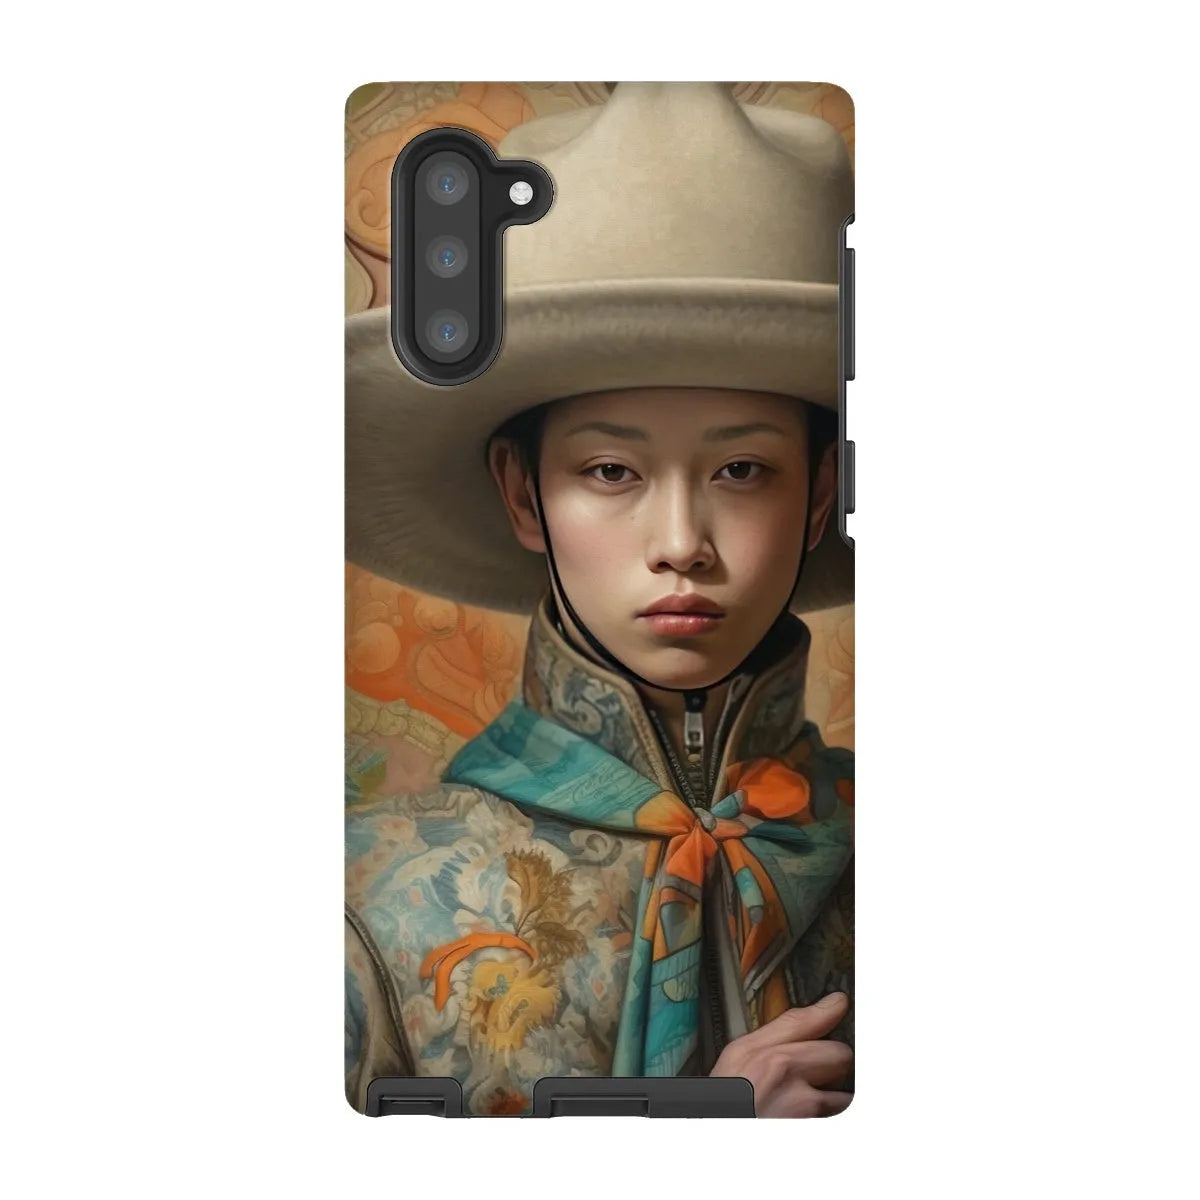 Xiang - Gaysian Chinese Cowboy Aesthetic Art Phone Case - Samsung Galaxy Note 10 / Matte - Mobile Phone Cases